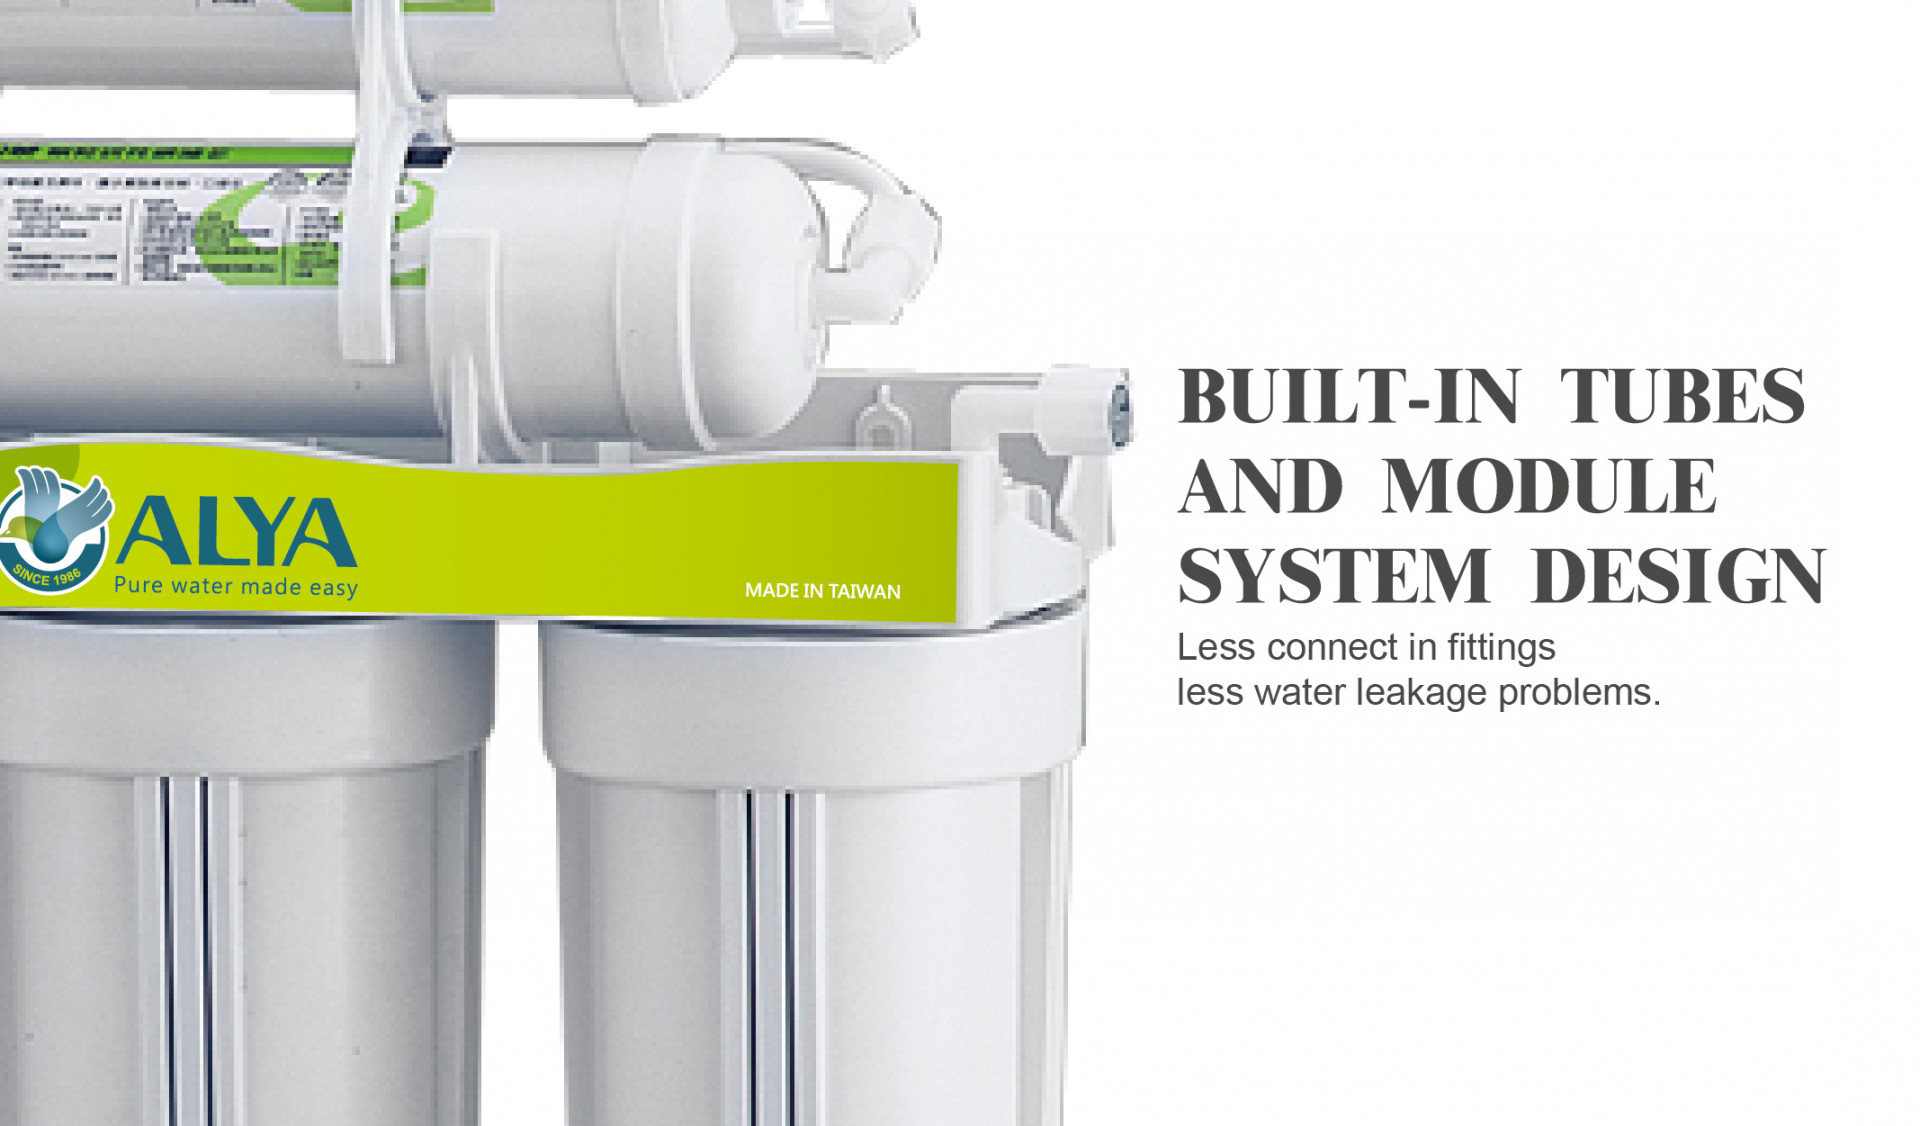 WATER PURIFIER BUILT-IN TUBES AND MODULE SYSTEM DESIGN